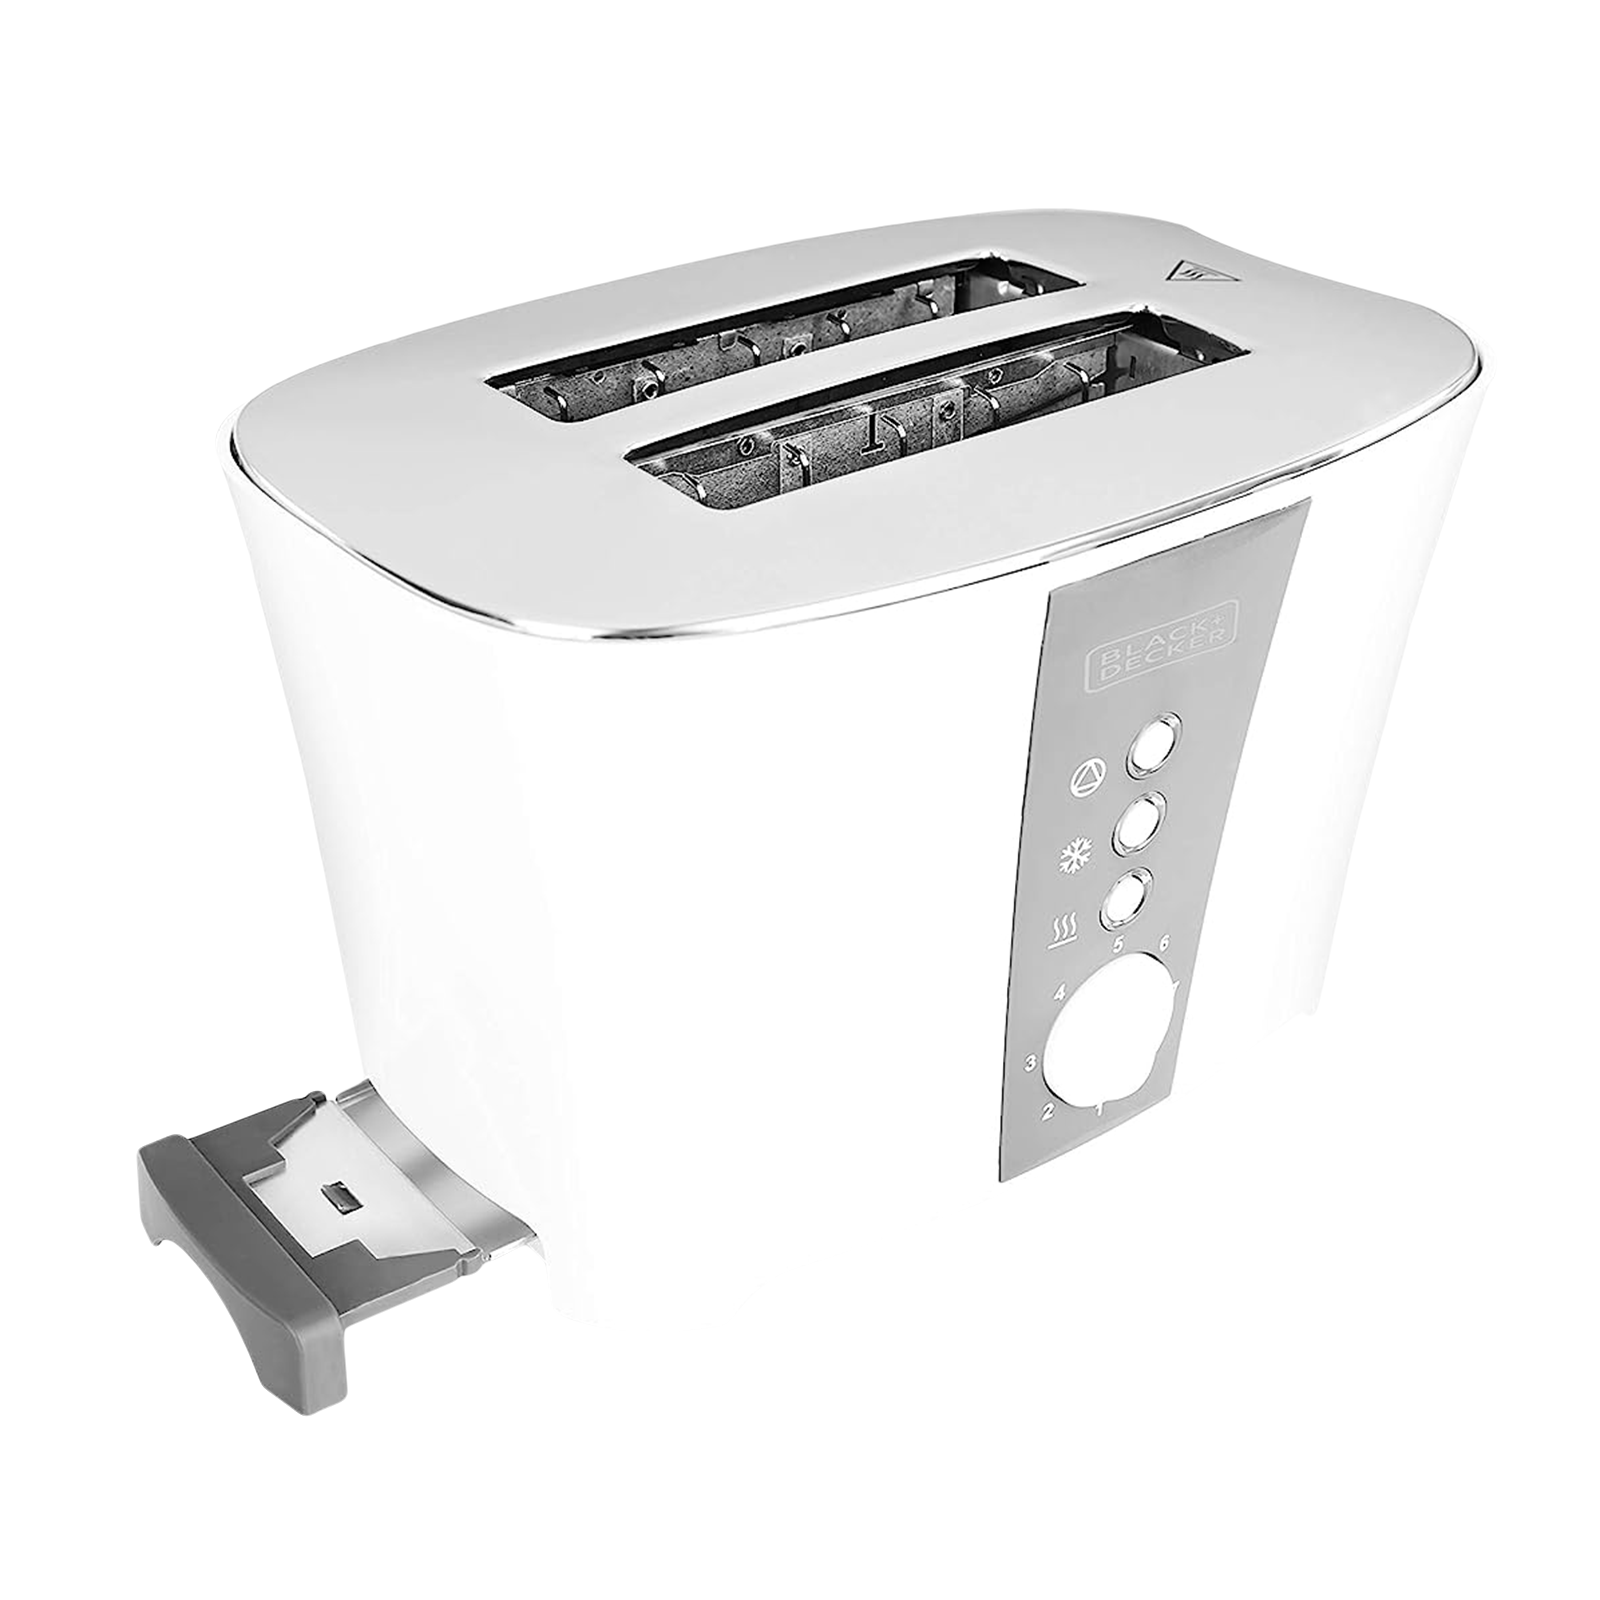 https://media.croma.com/image/upload/v1691676192/Croma%20Assets/Small%20Appliances/Toasters%20Sandwich%20Makers/Images/218052_6_juzjys.png